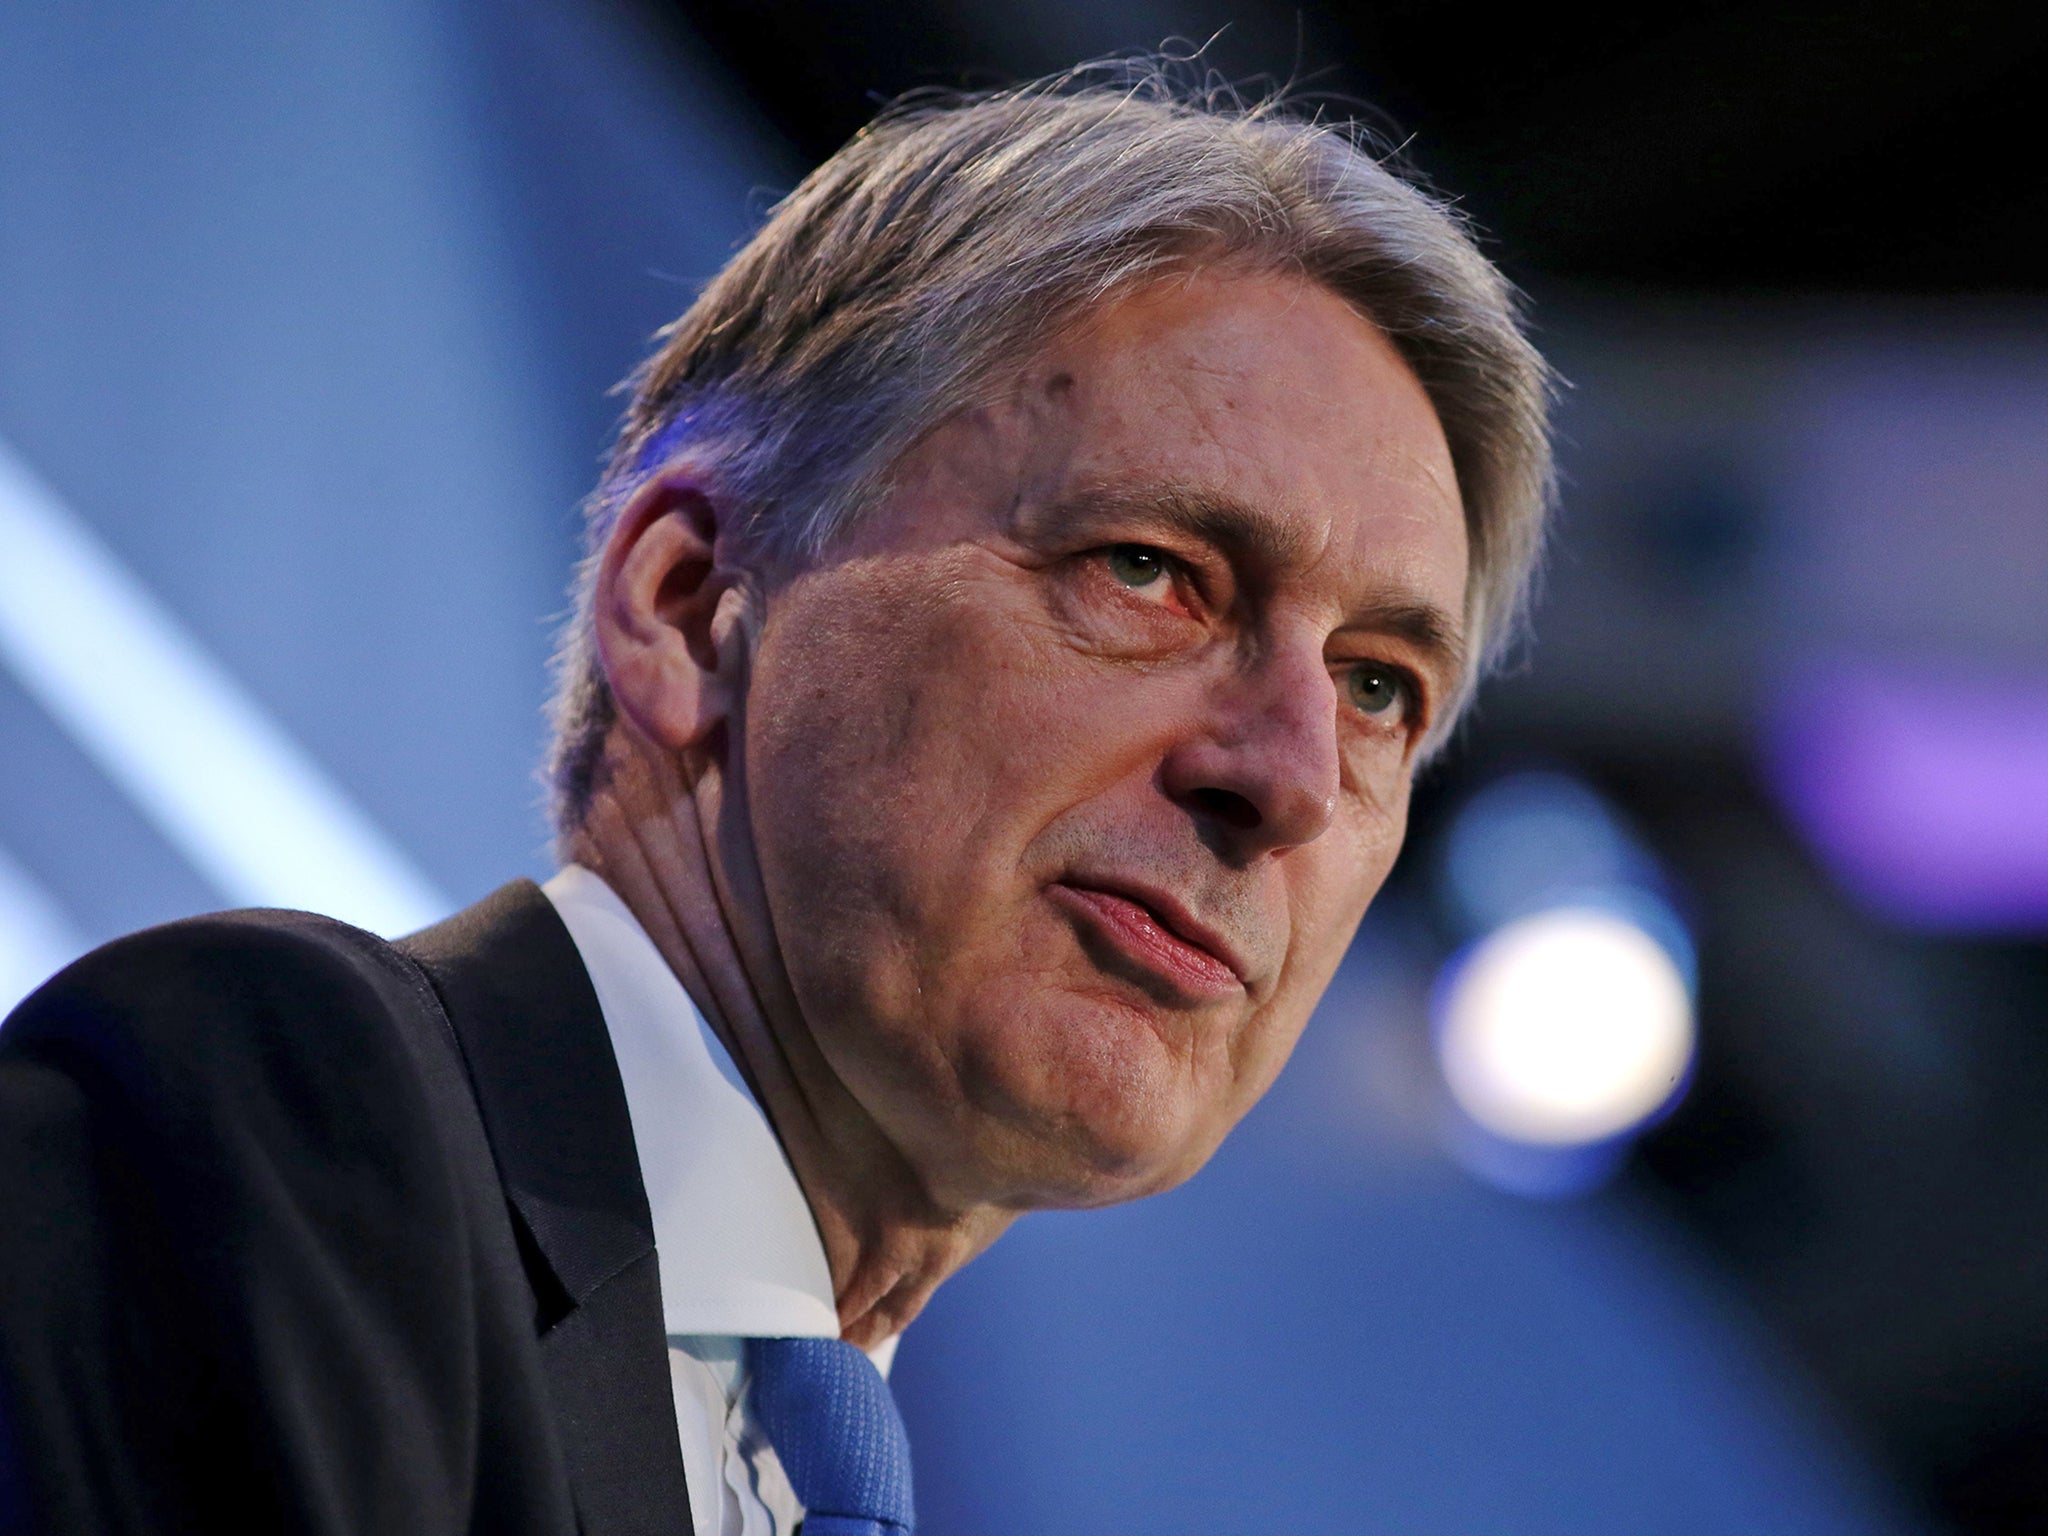 Philip Hammond had suggested if the public finances continued to improve he would 'have capacity to enable further increase in public spending and investment in the years ahead'